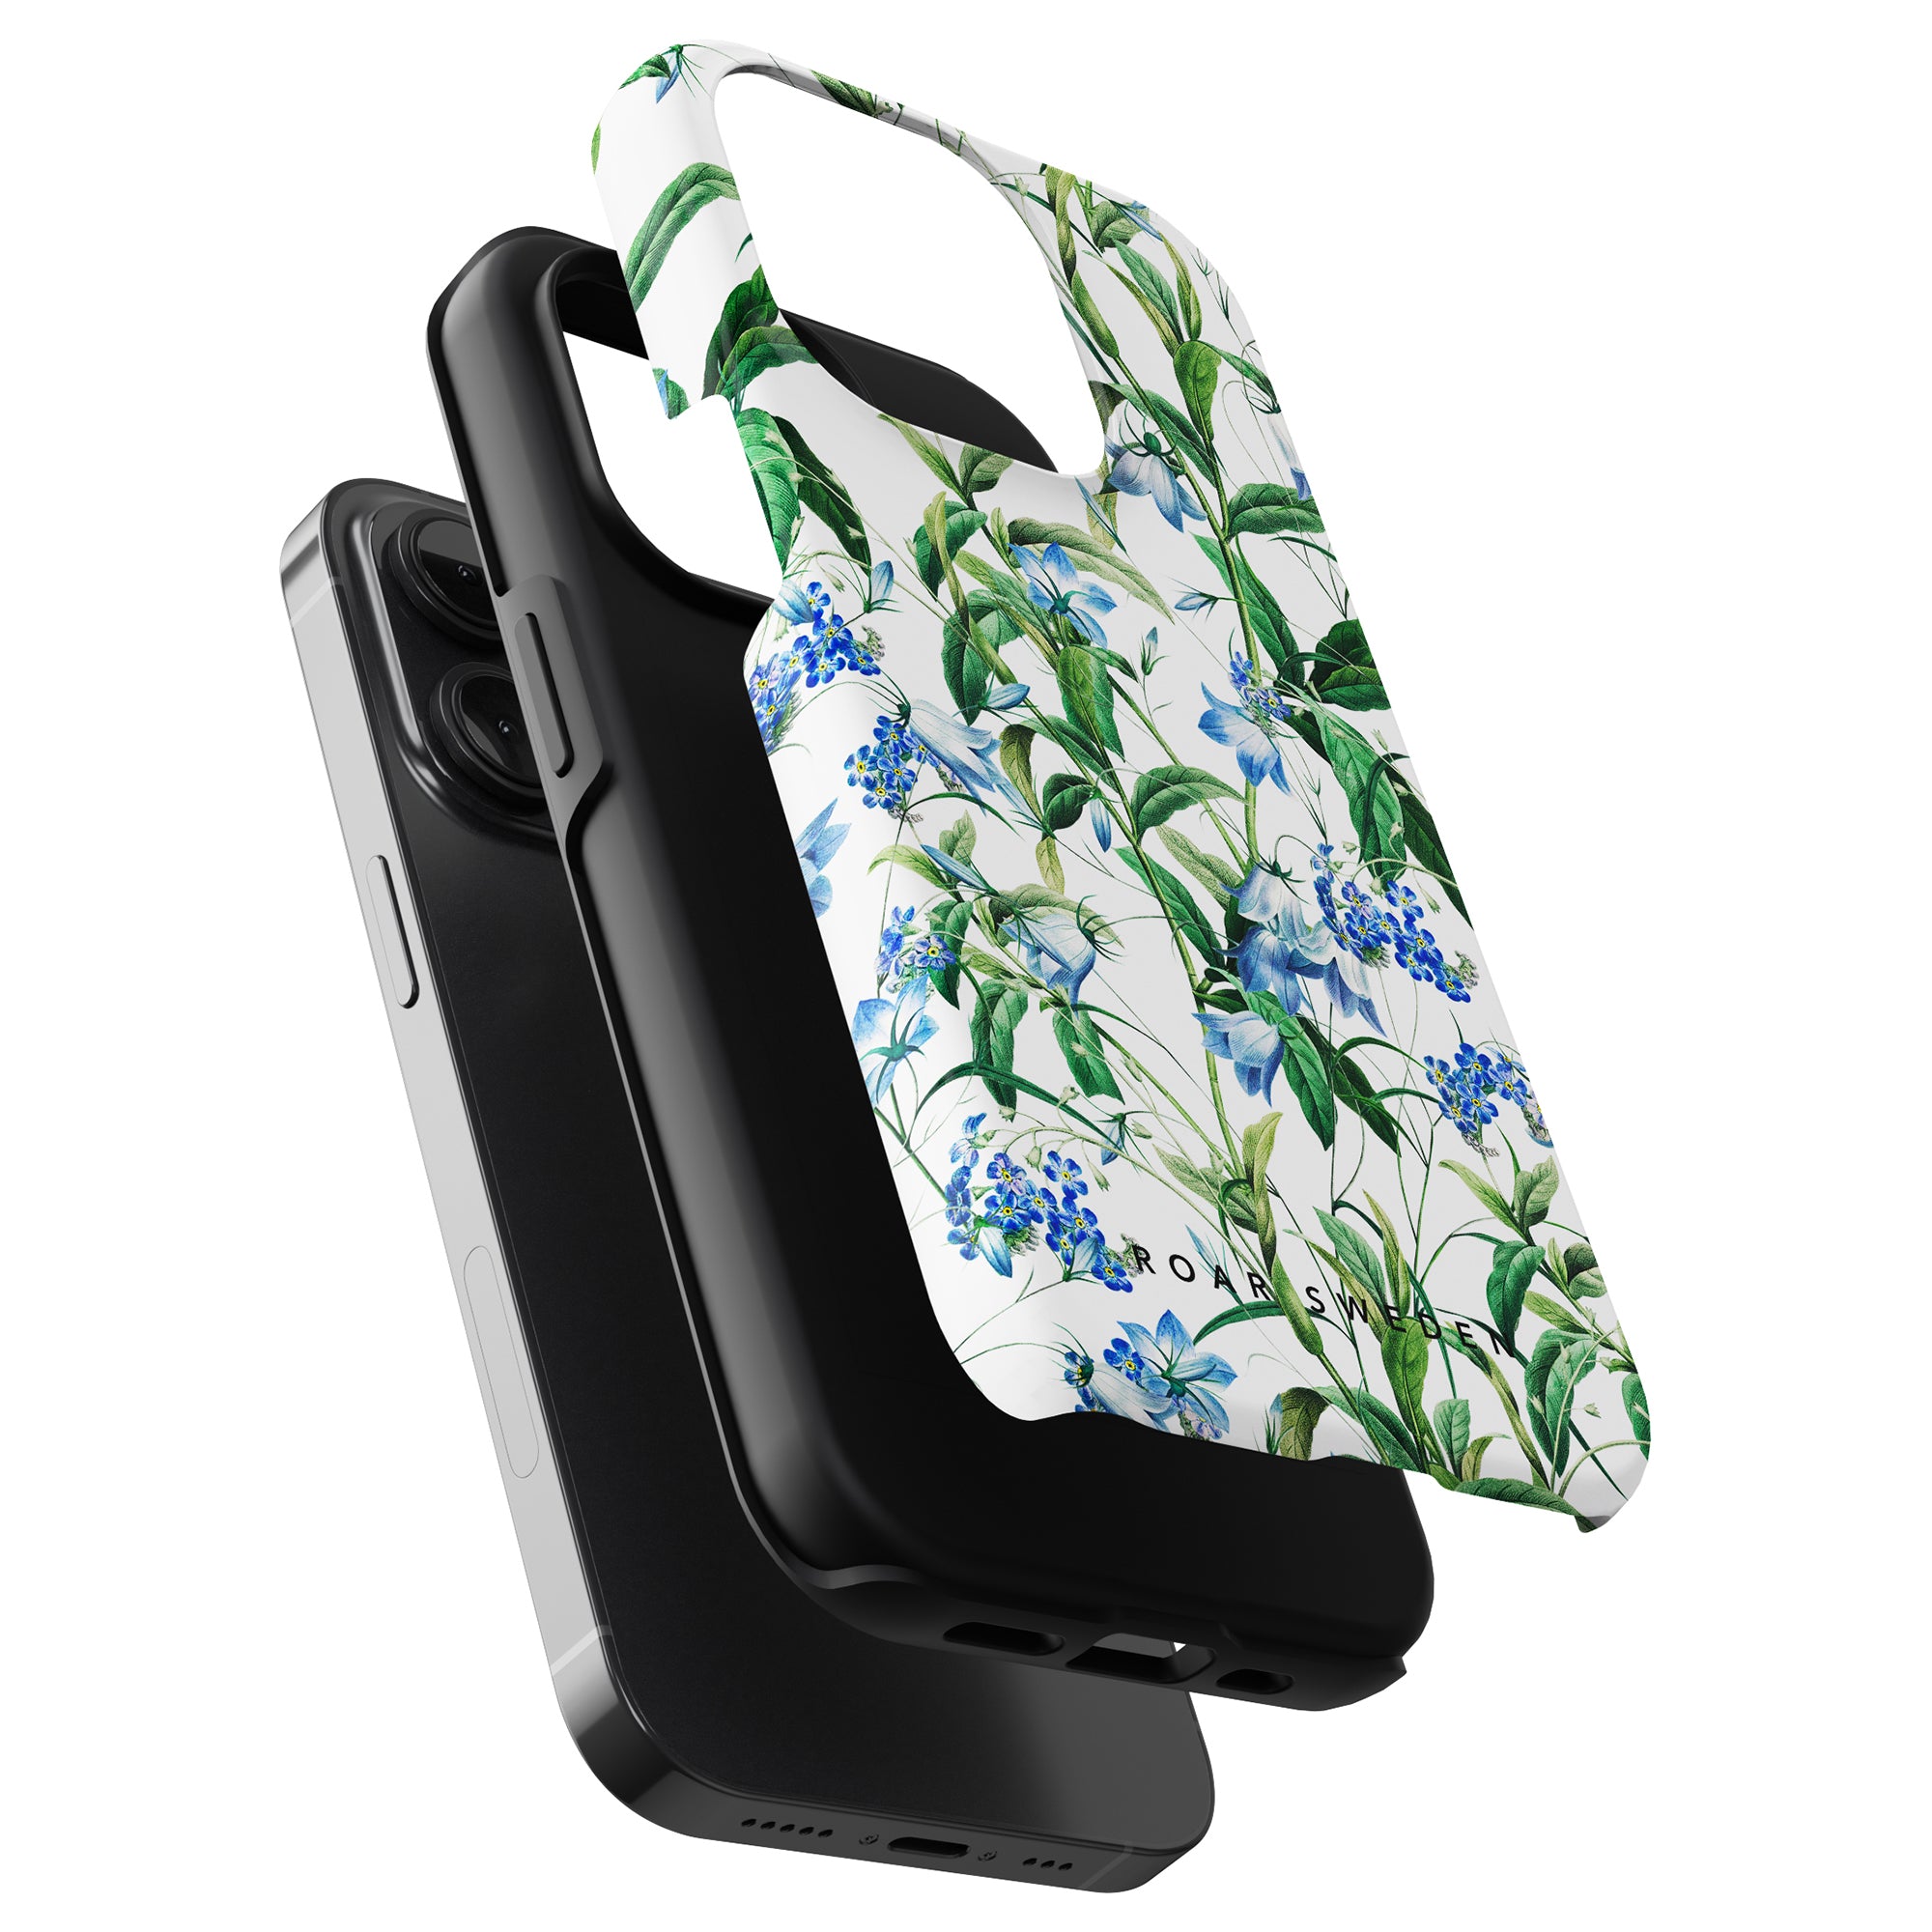 Black smartphone with a Blue Bells - Tough Case and an exfoliating cleanser advertisement.